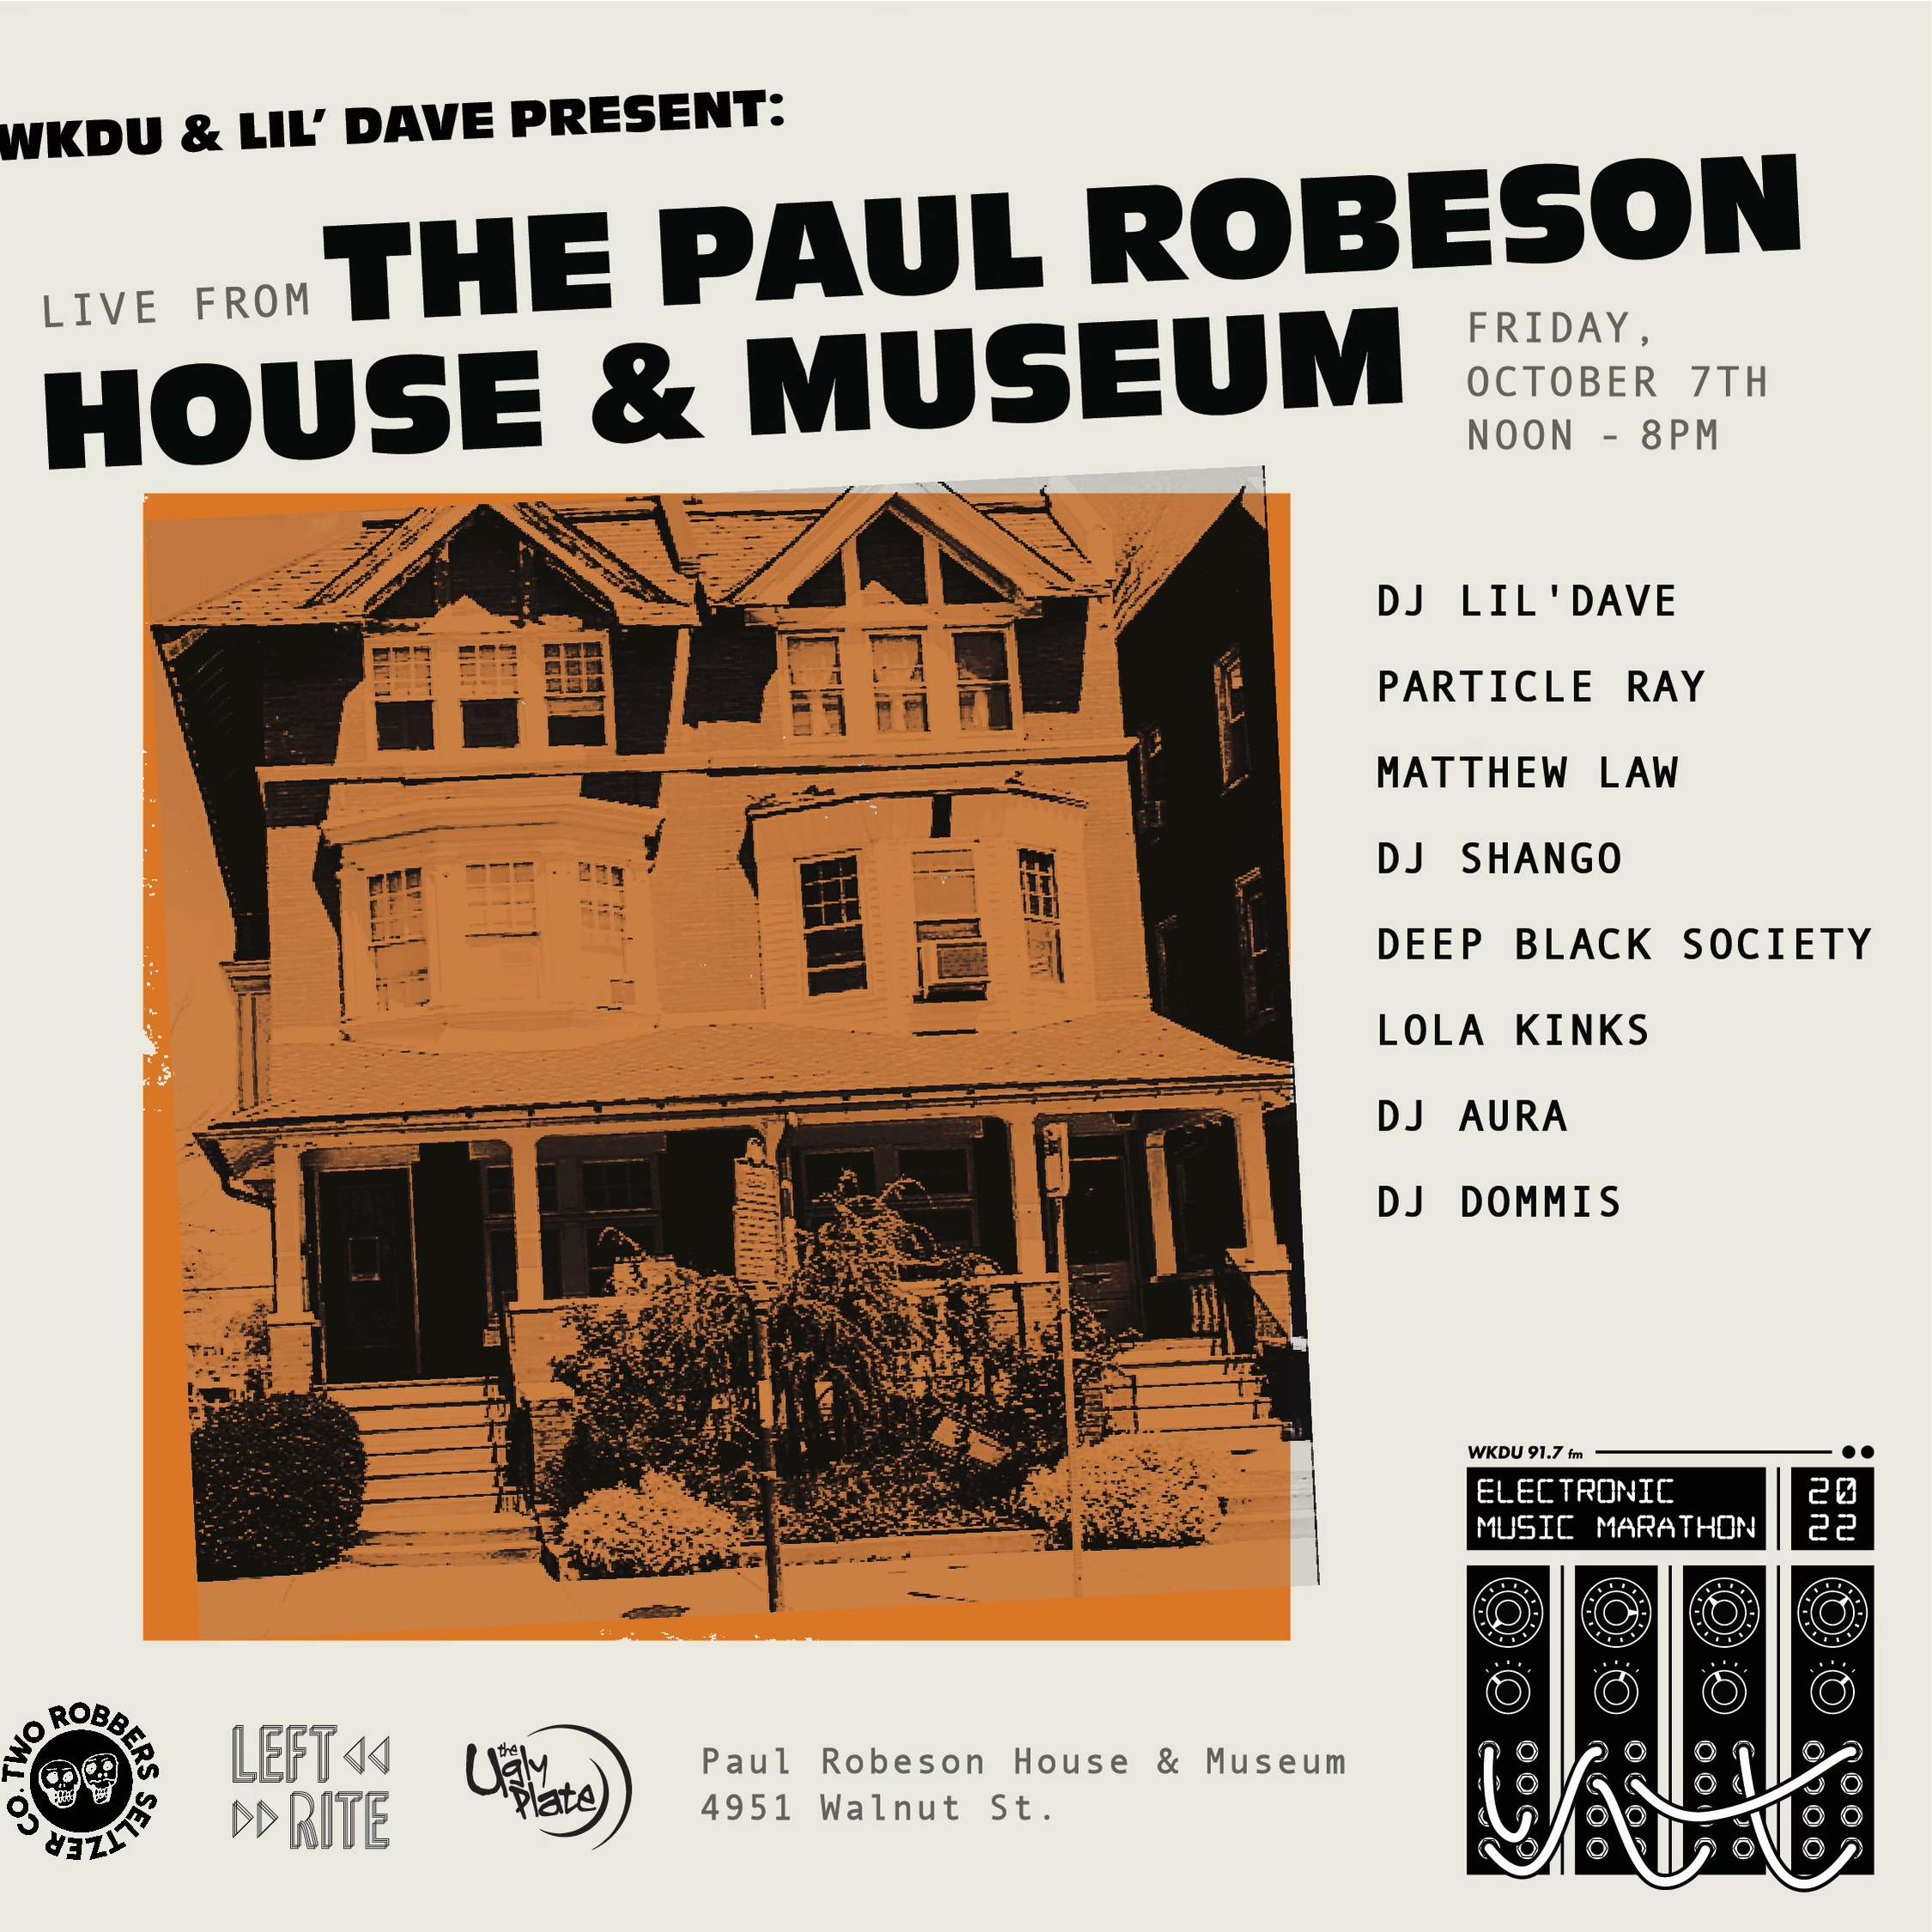 WKDU & Lil' Dave Present: Live from The Paul Robeson House & Museum - Página frontal